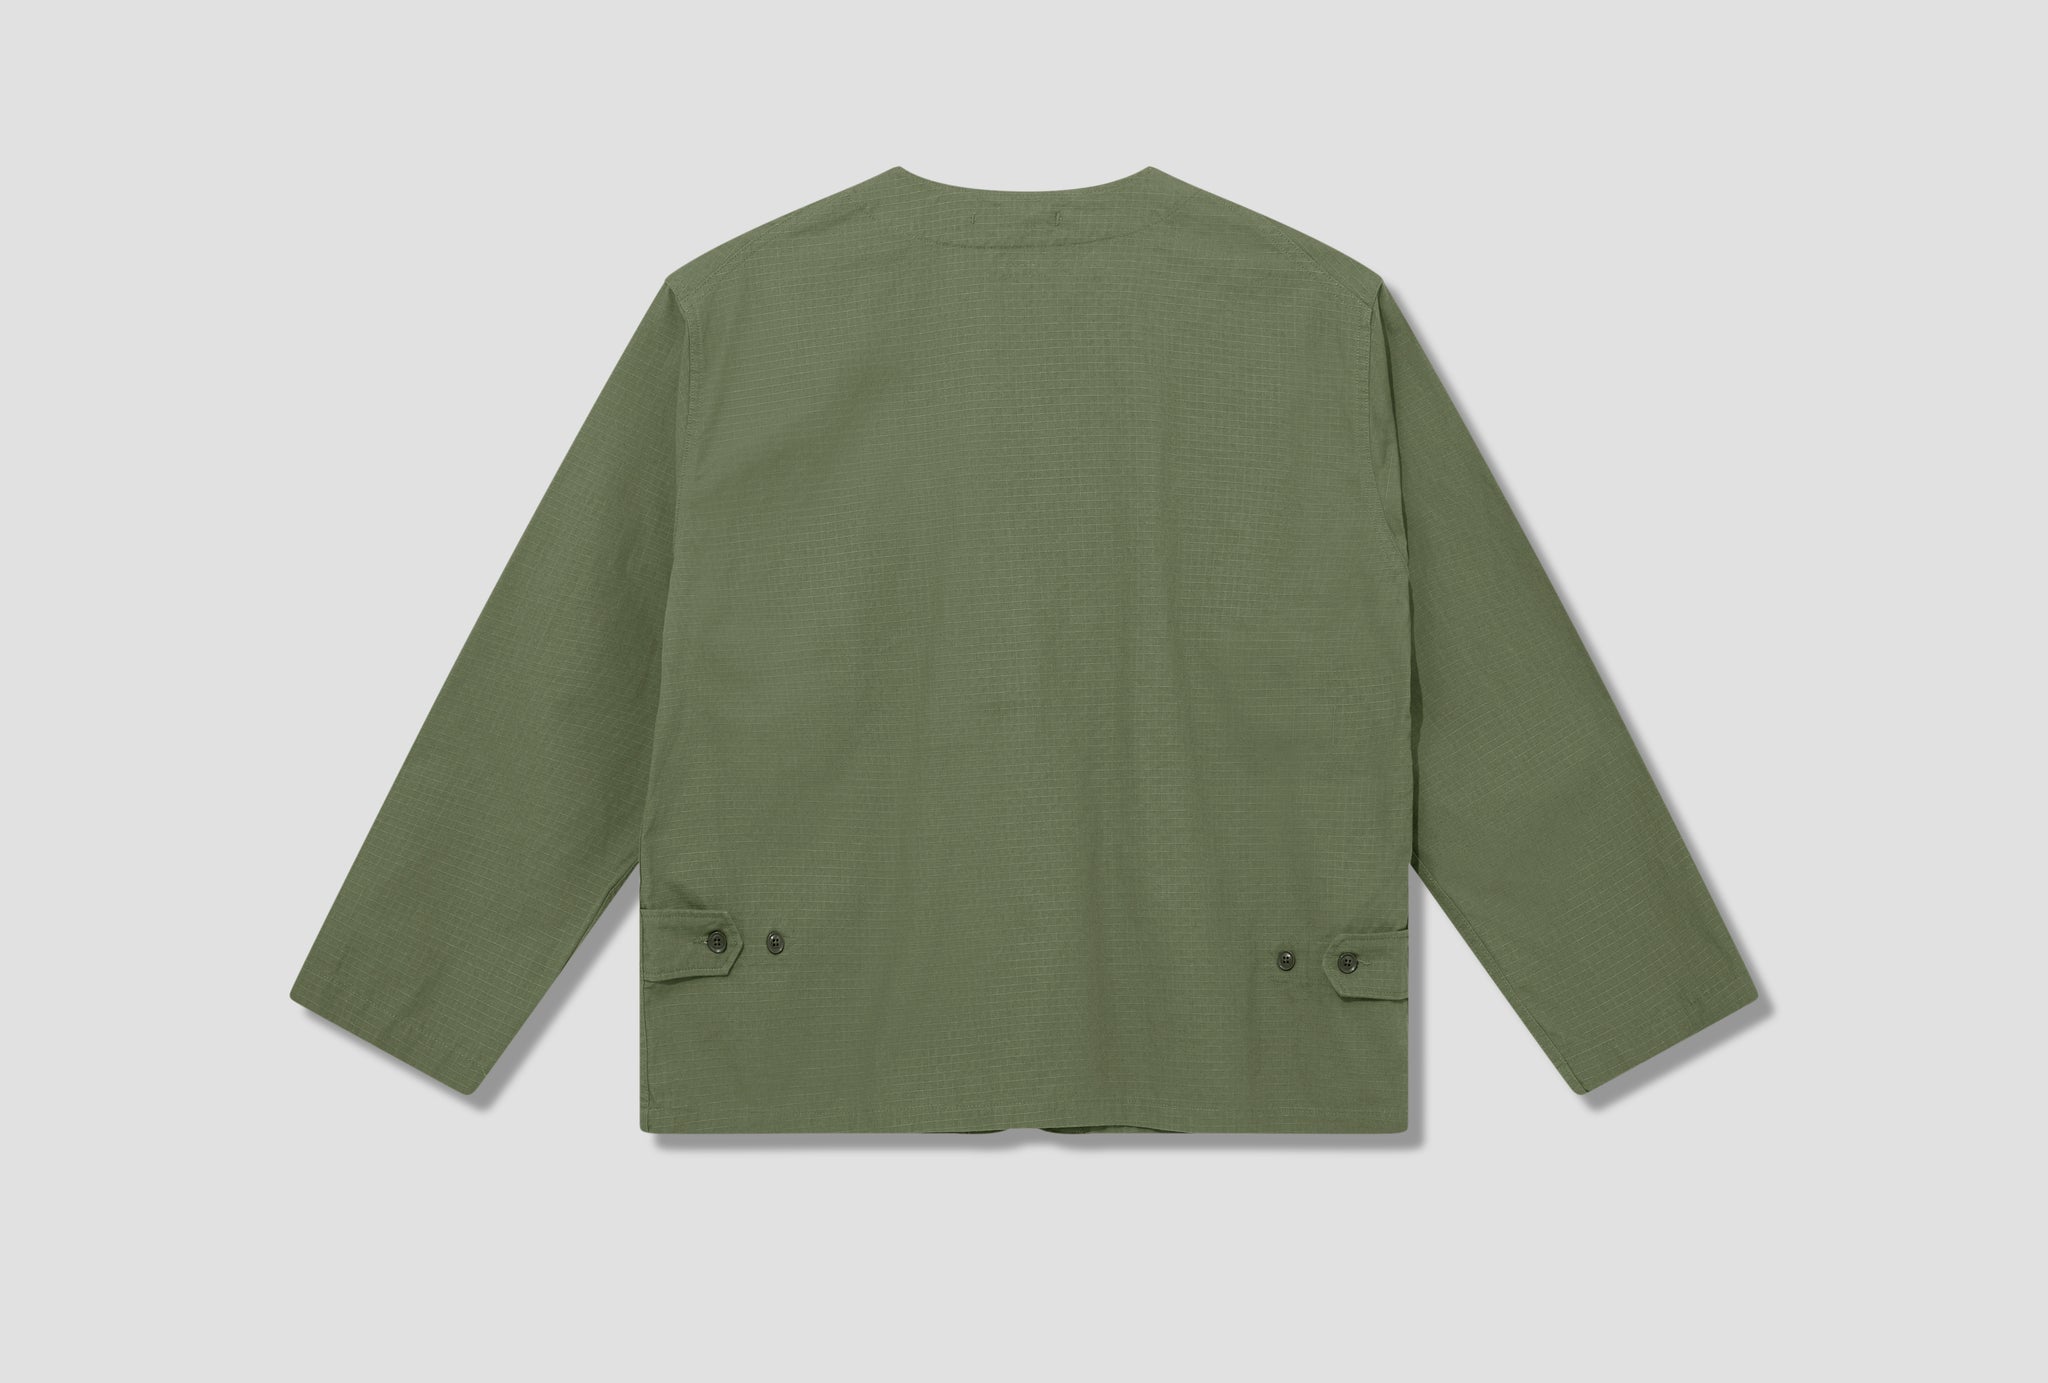 CARDIGAN JACKET - OLIVE COTTON RIPSTOP 23S1D034